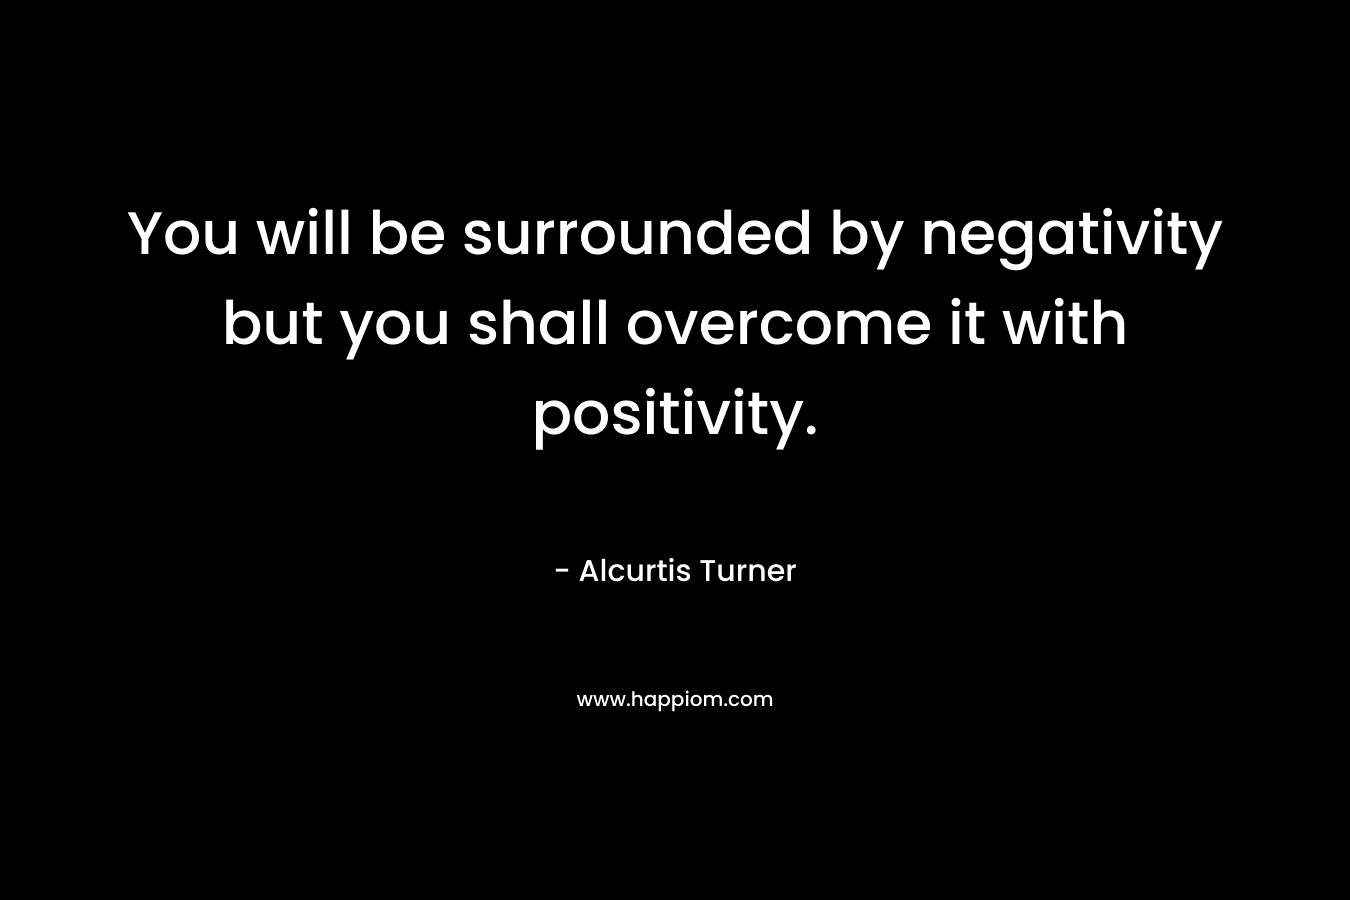 You will be surrounded by negativity but you shall overcome it with positivity.